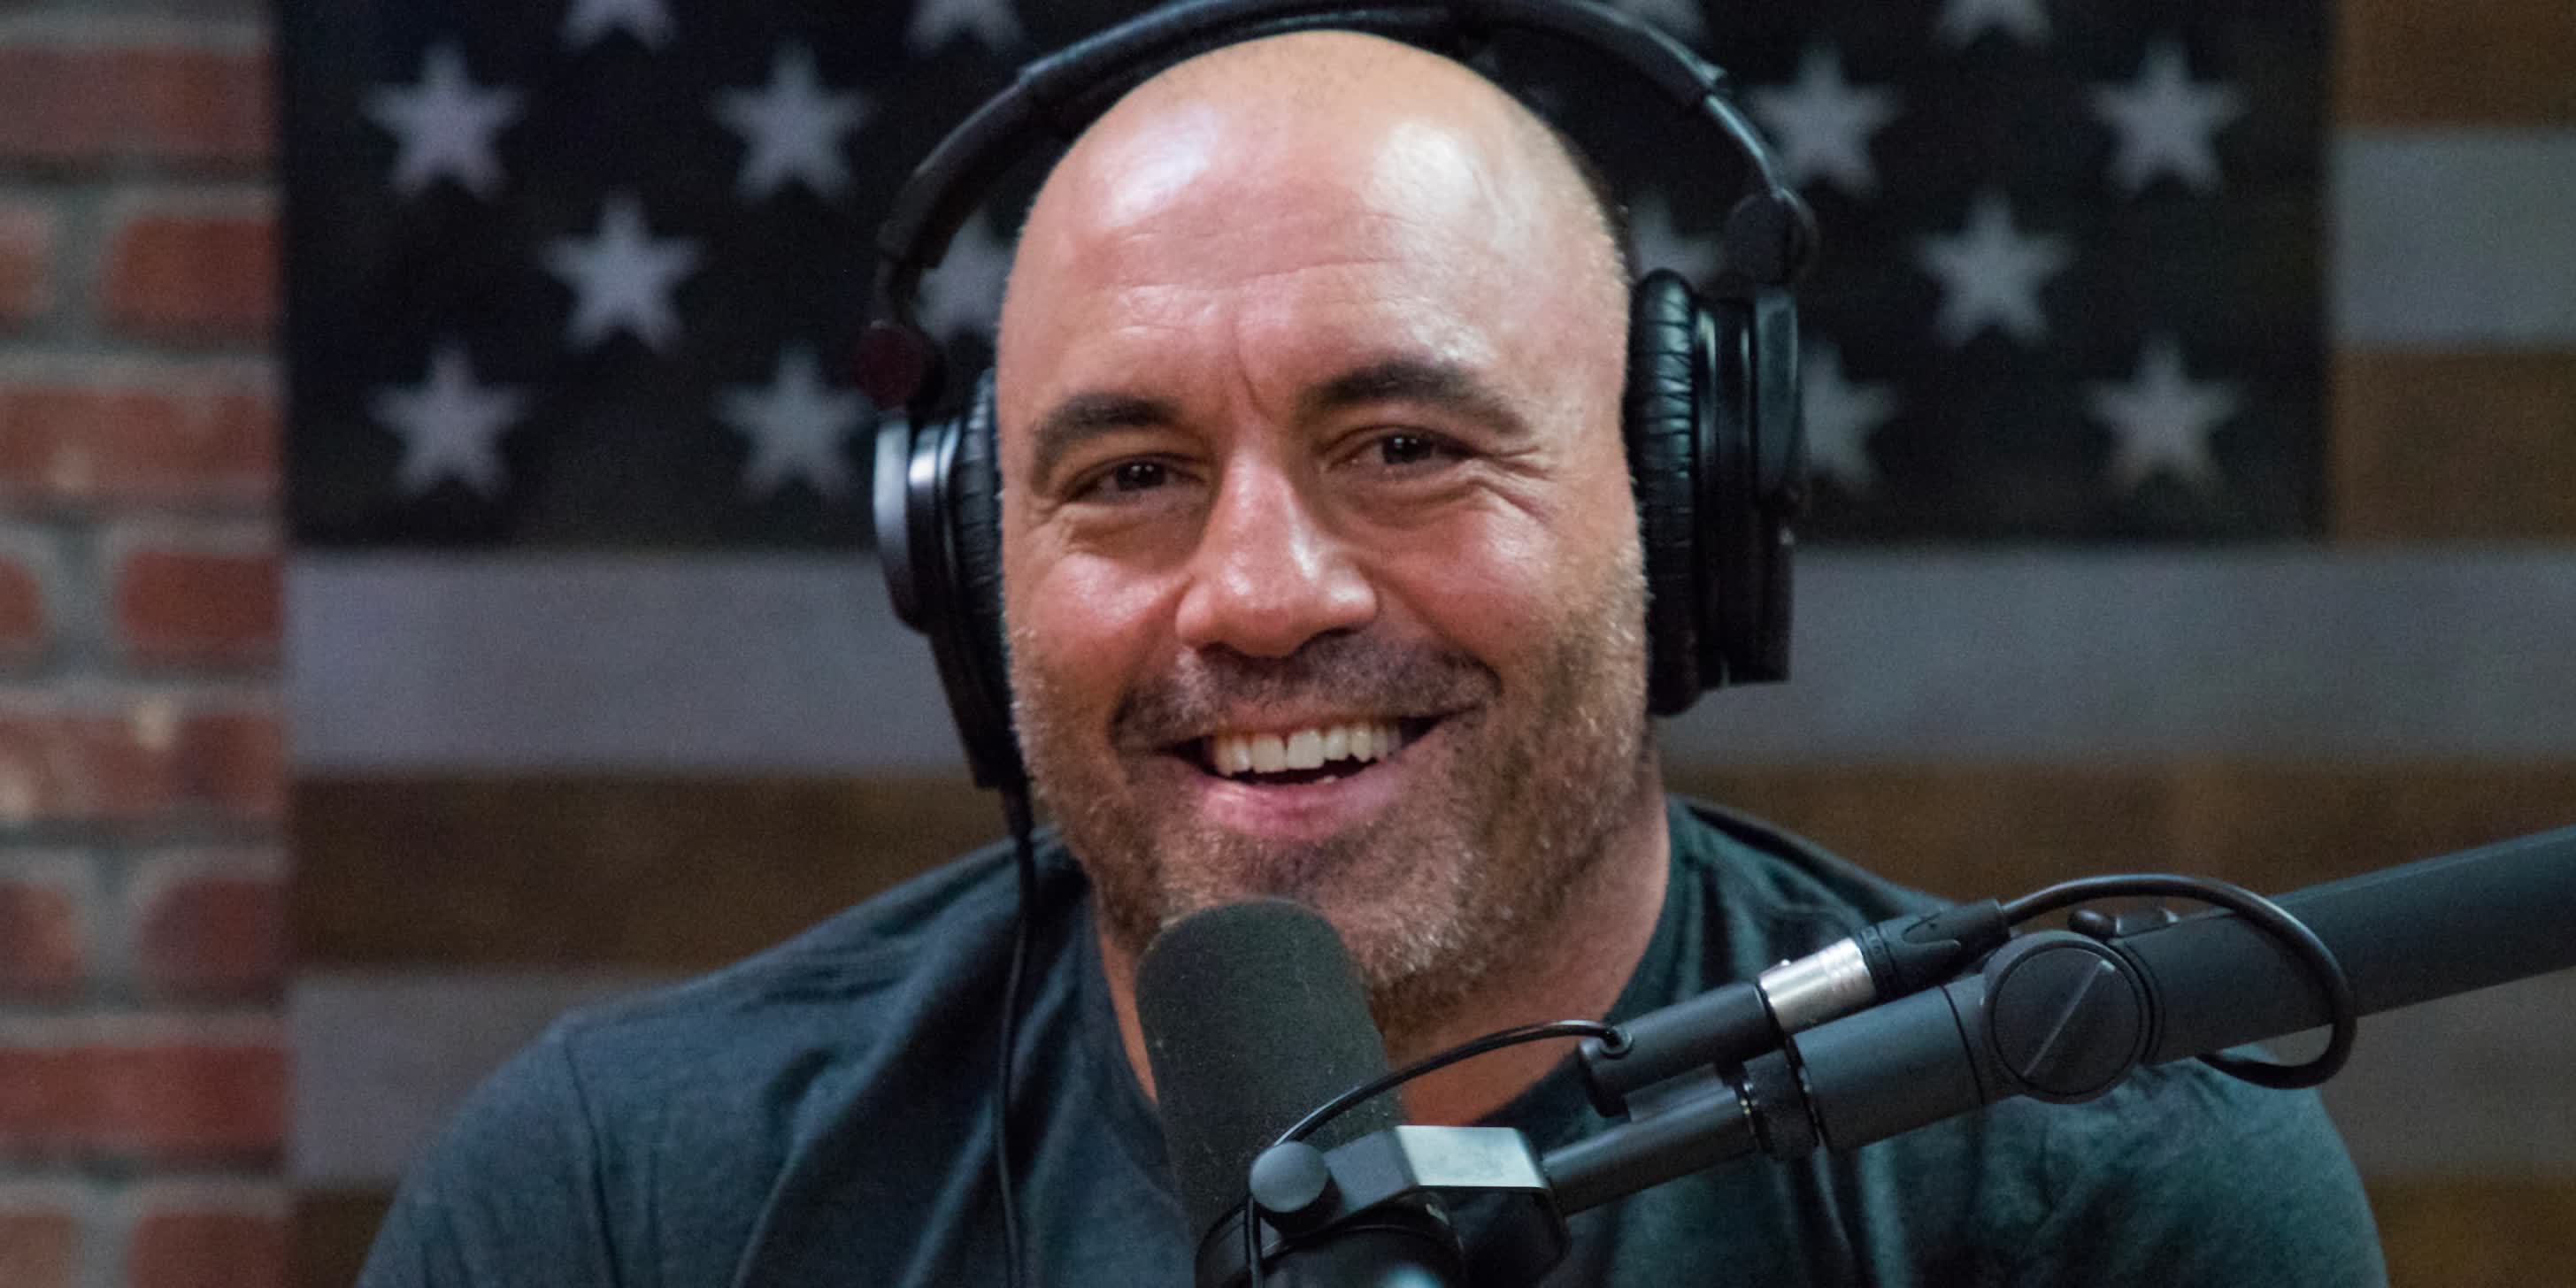 Spotify deal with Joe Rogan actually worth more than $200 million, report claims